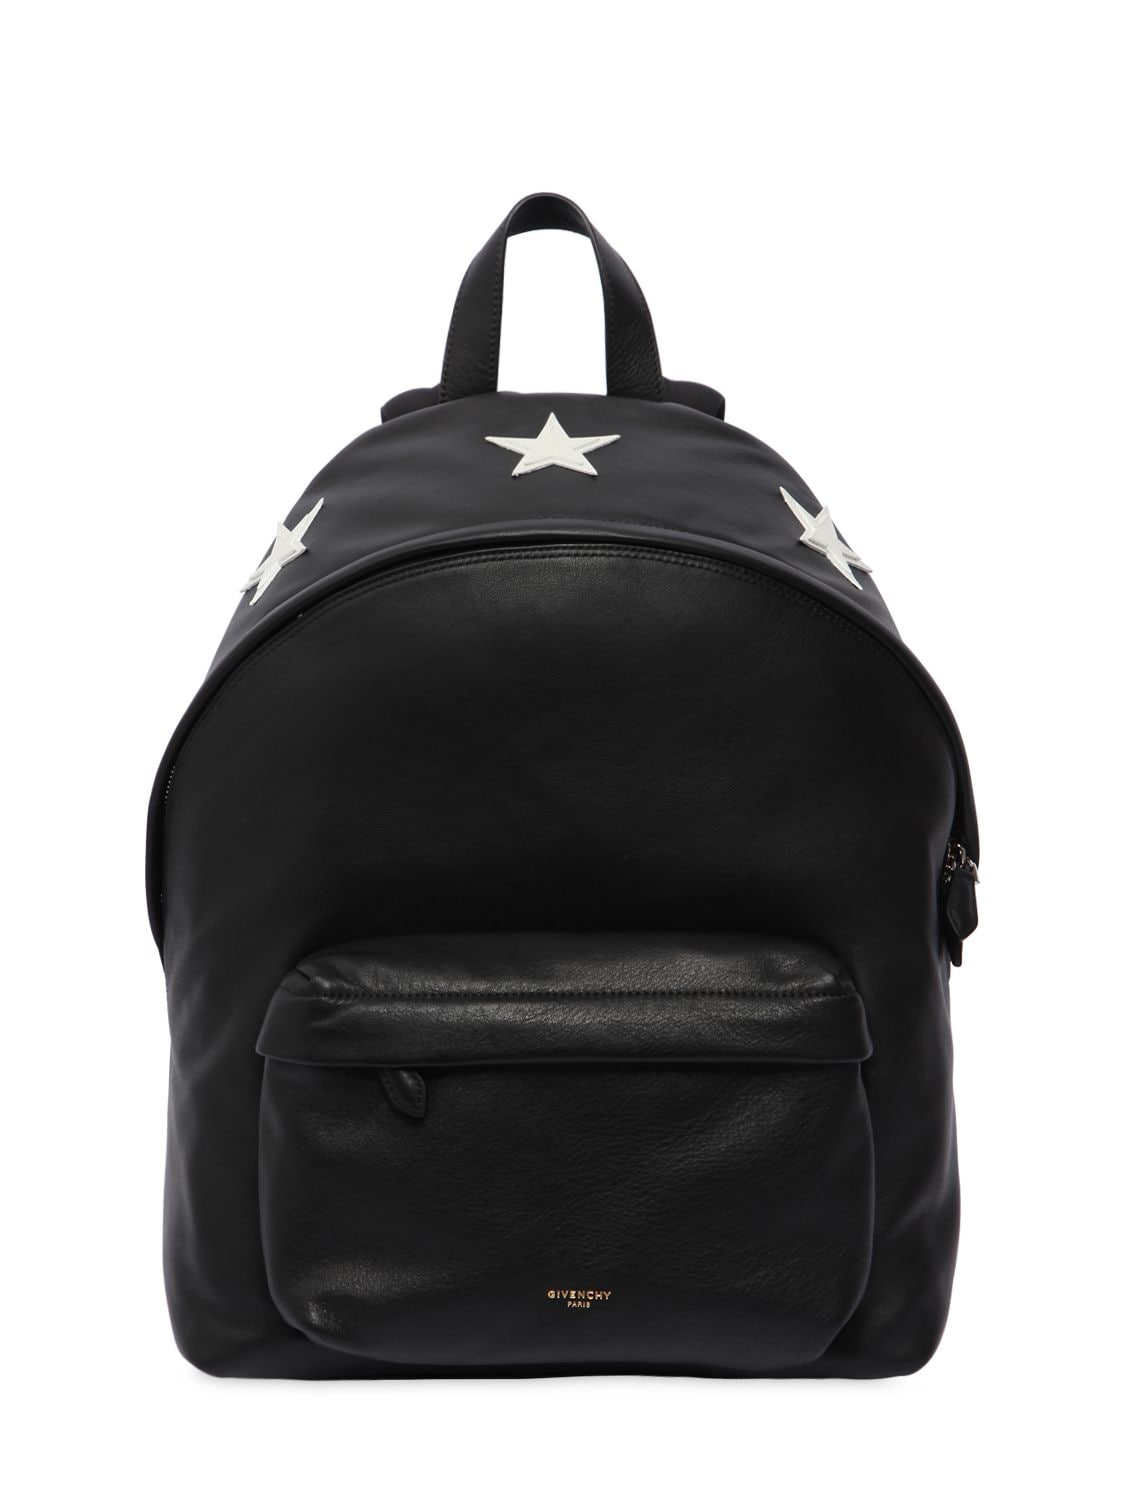 Givenchy Stars Print & Embossed Leather Backpack In Black